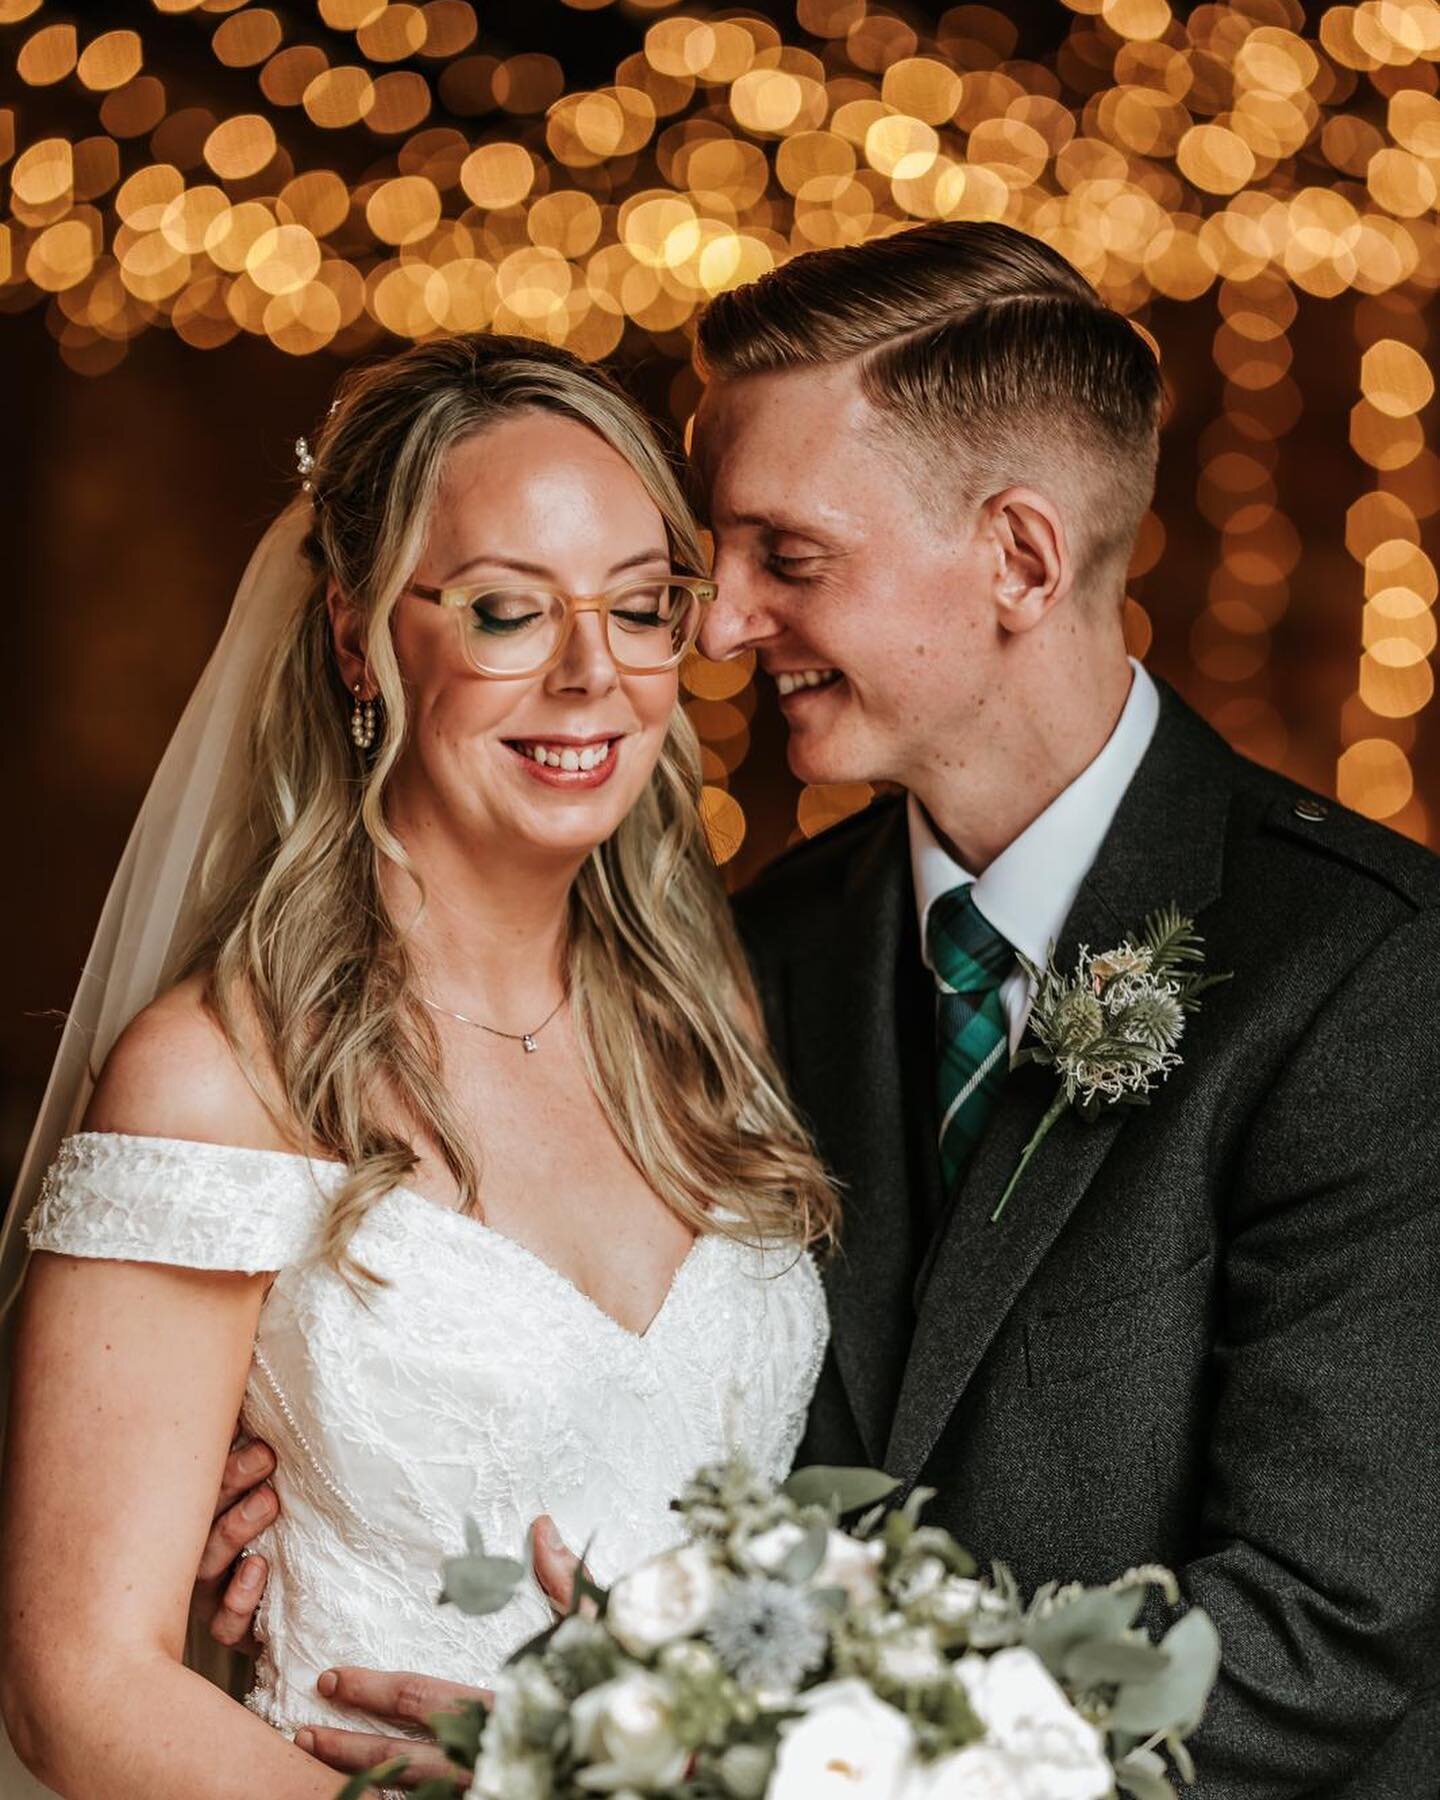 A very special day for a very special friend, congratulations to our beautiful Bride Emma @emmajdevers &amp; her beloved Sean ❤️❤️❤️ Harry the dog you looked superb too! 

Photography: @corinnemoffatphoto 
Makeup: @anacruzmakeup 
Hair: @meganmccarron